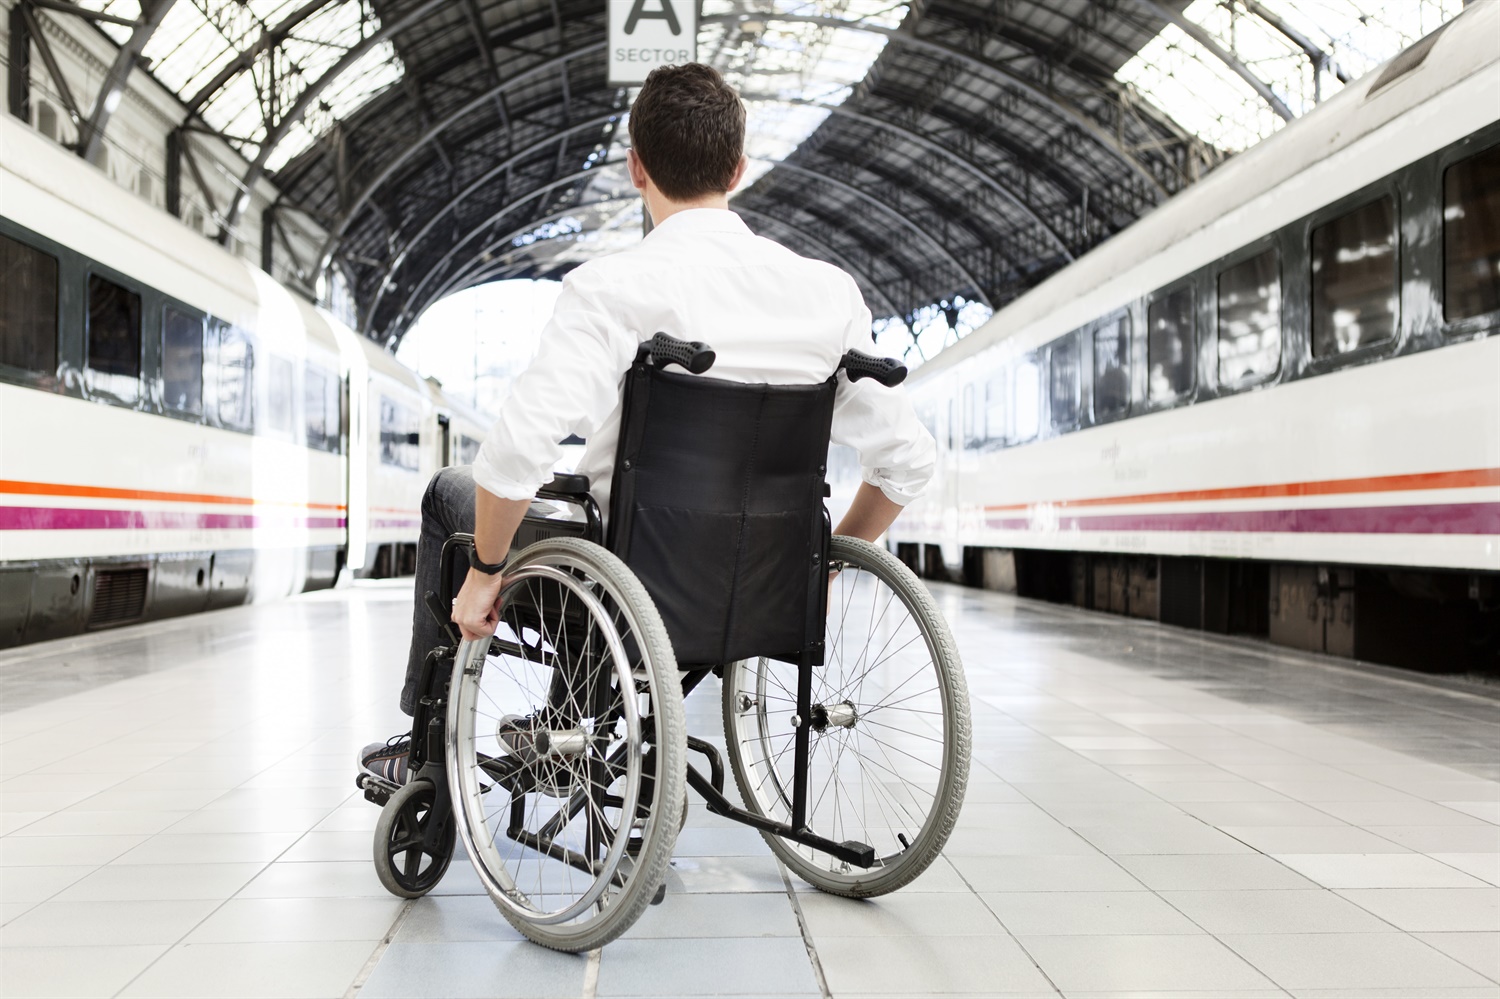 £300m inclusion scheme in the works to make transport accessible by 2030